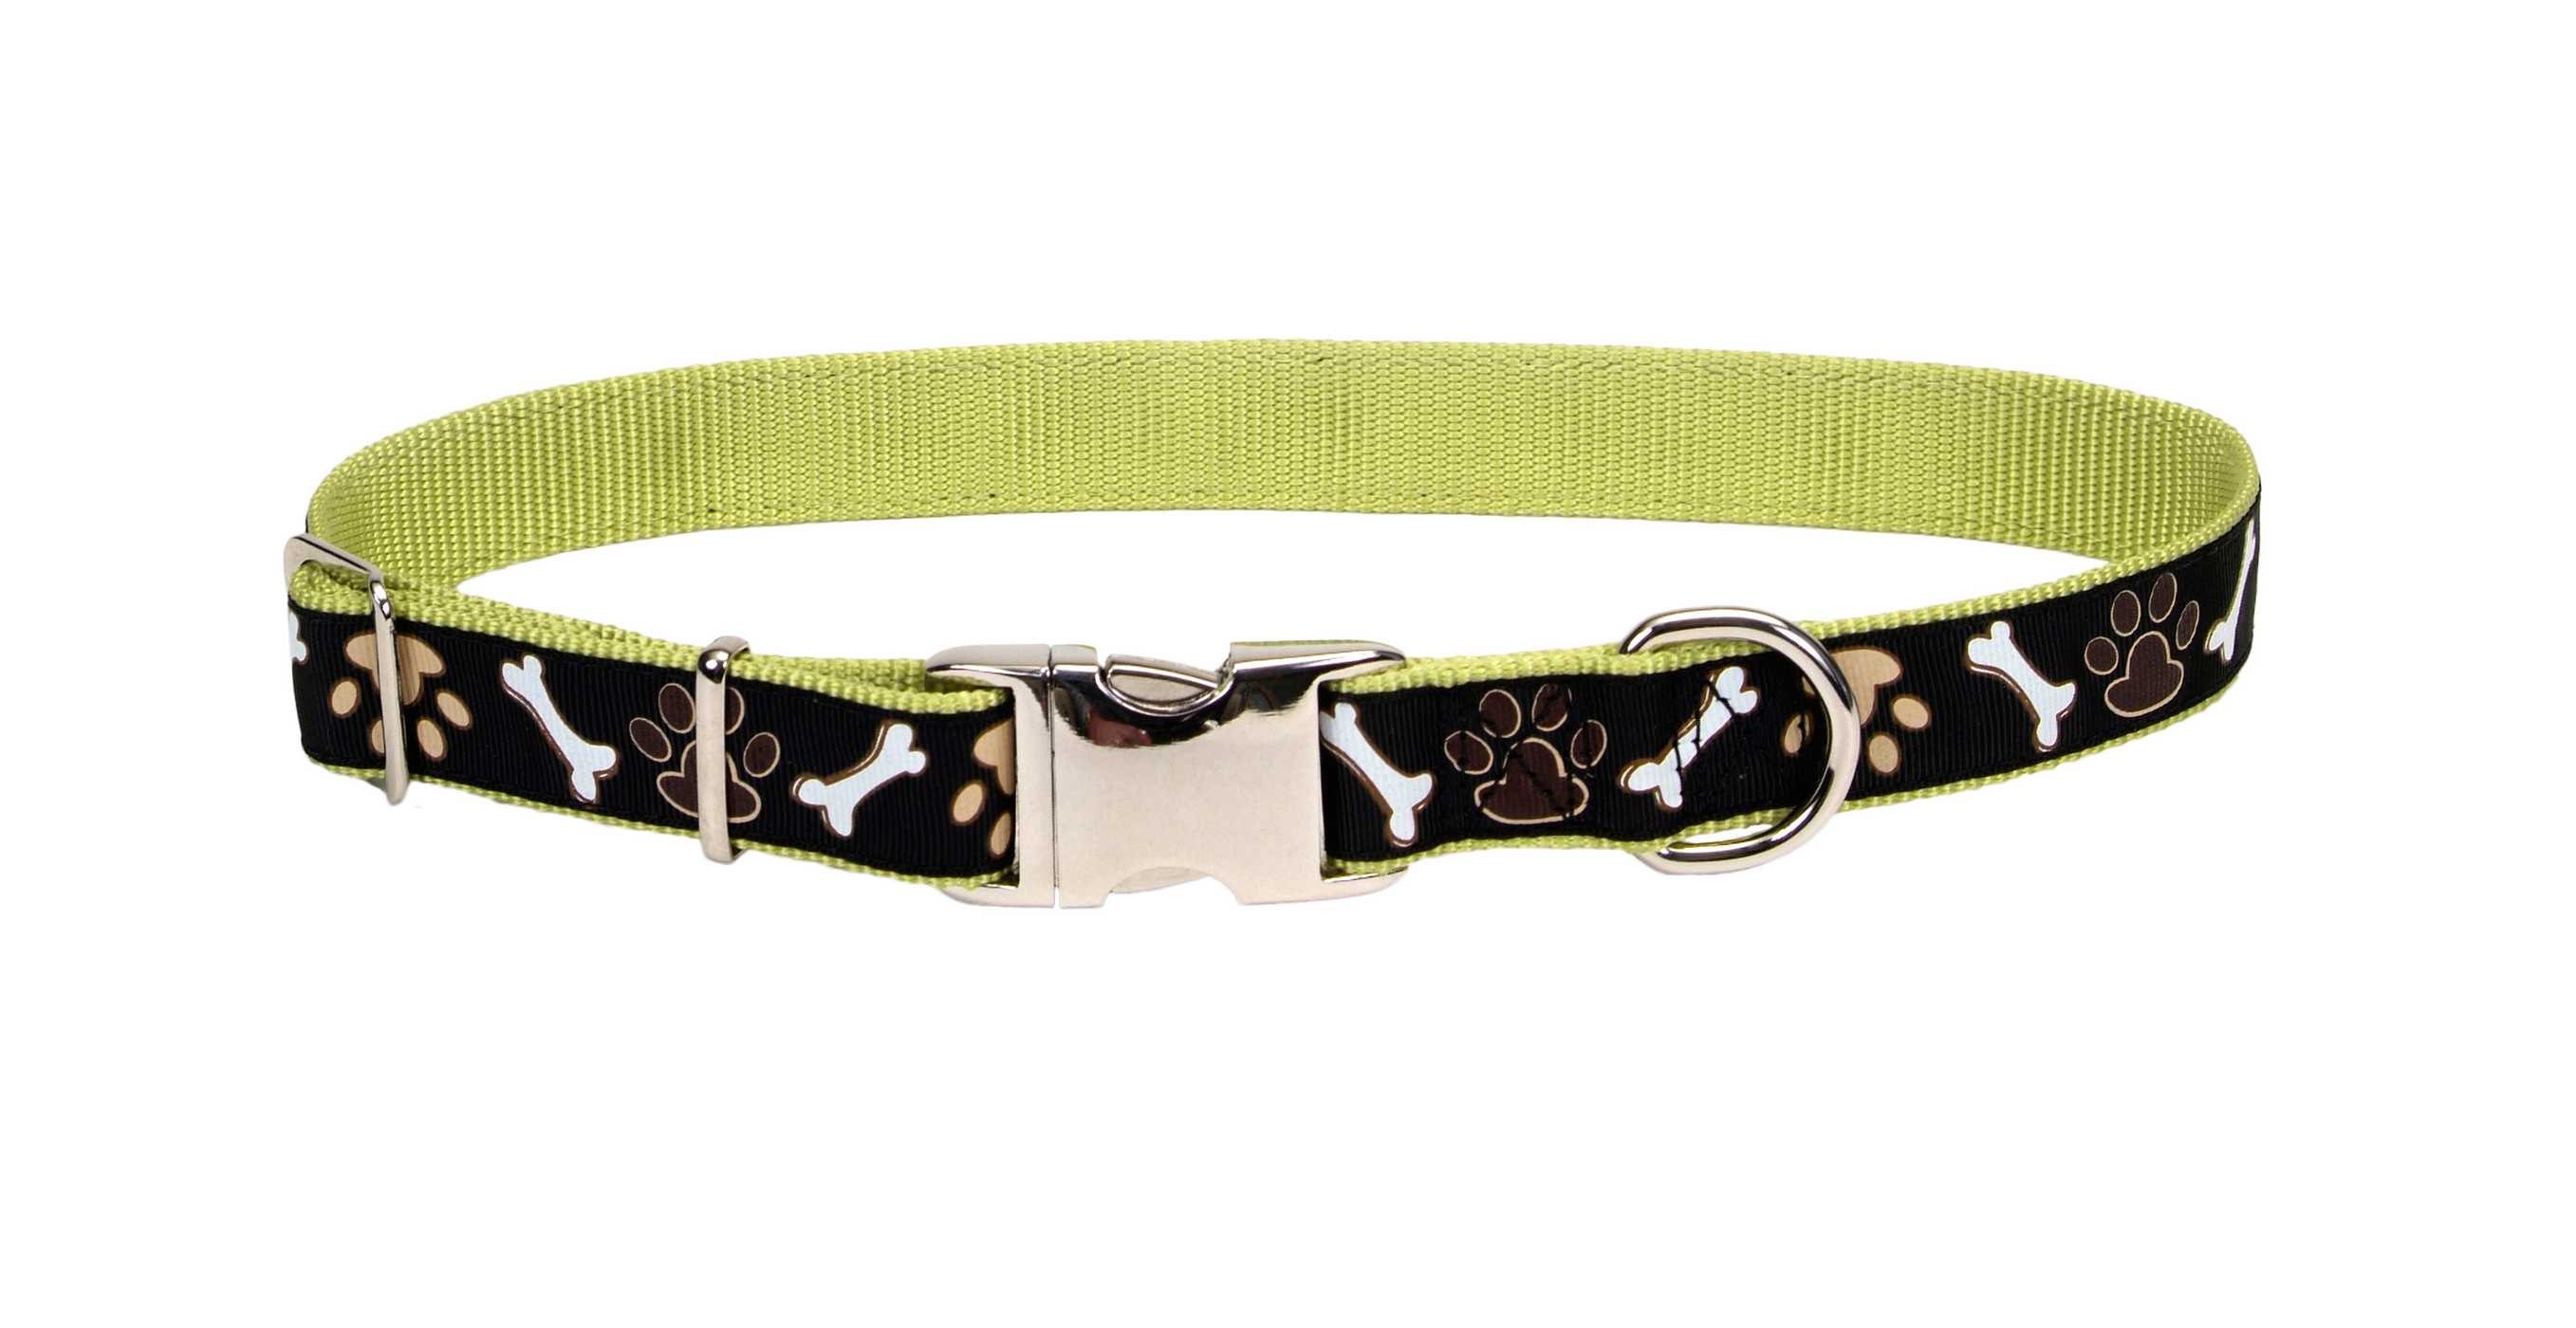 Coastal Pet Products 1 Inch Adjustable Nylon Collar with Brown Paws & Bones Ribbon; image 2 of 2